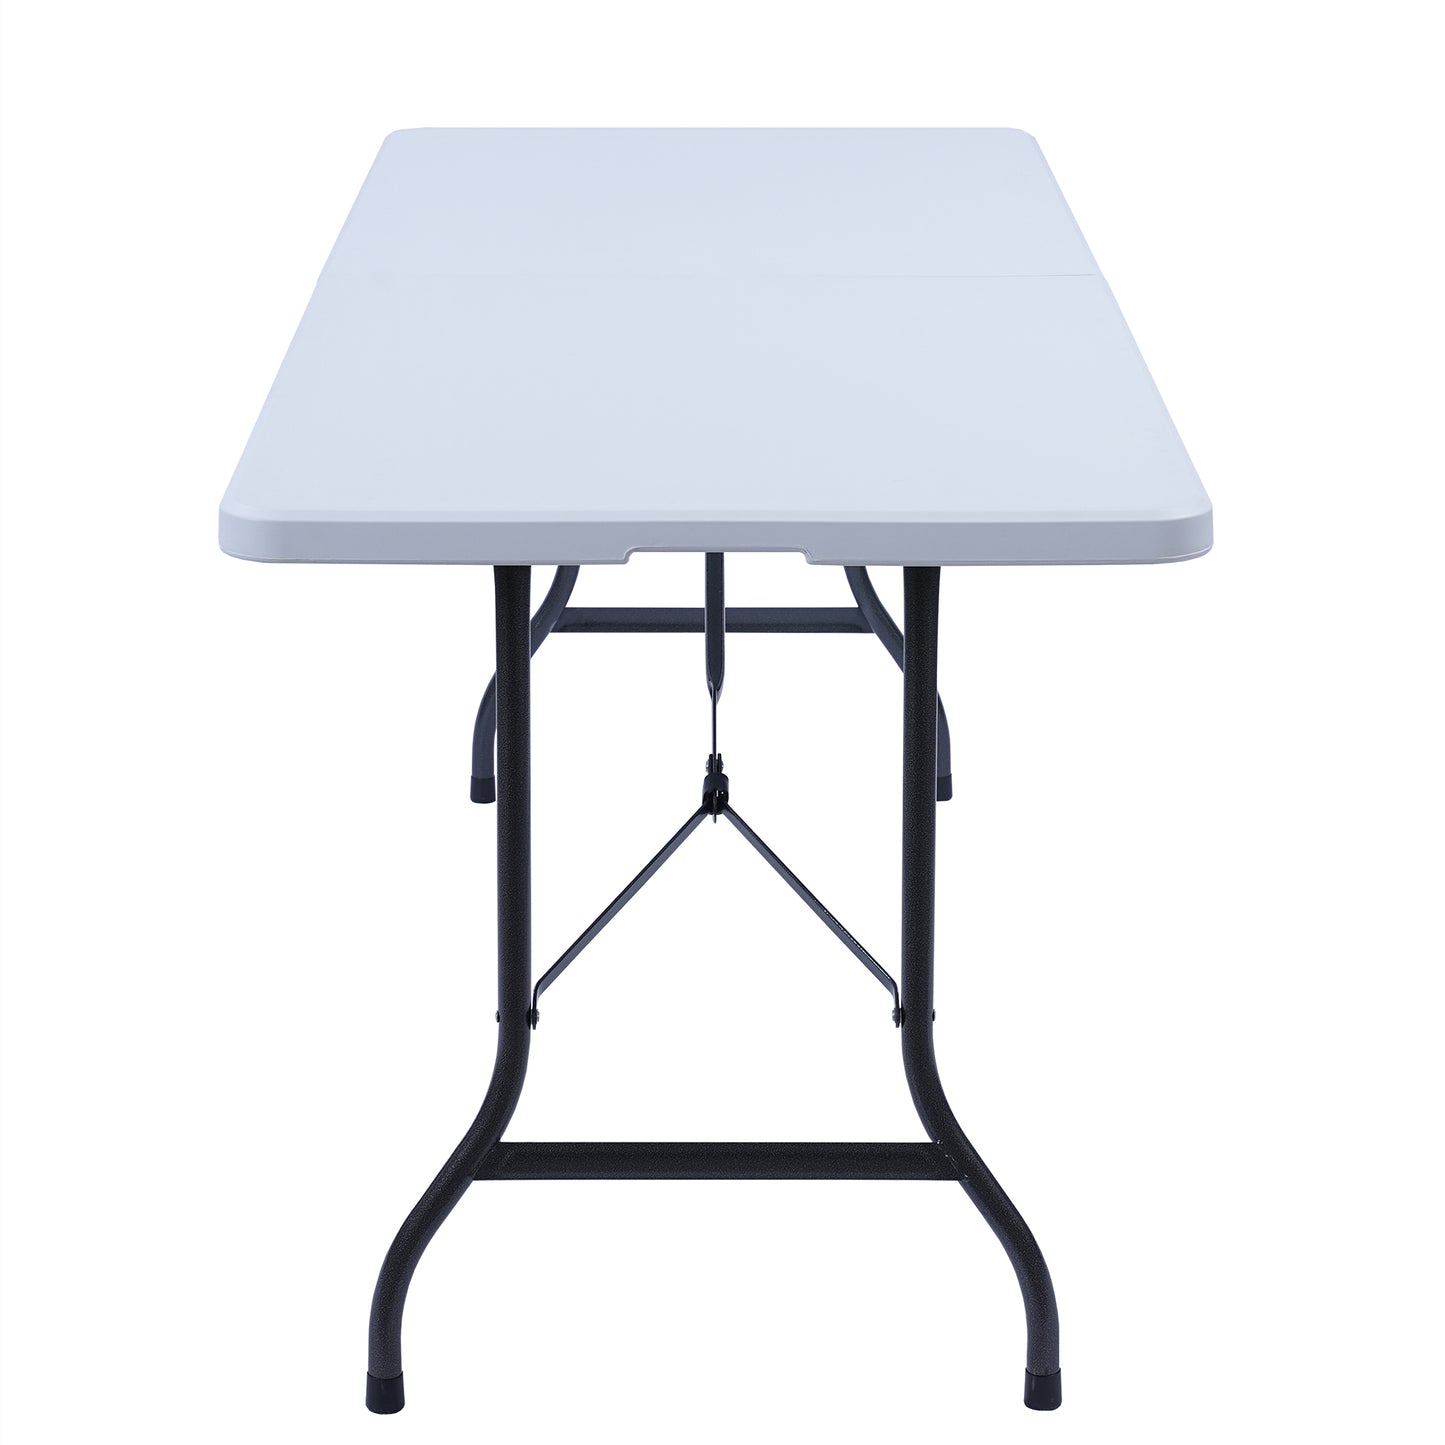 6 Ft Portable Folding Table, Fold-in-Half Plastic Card Table Dinging Table